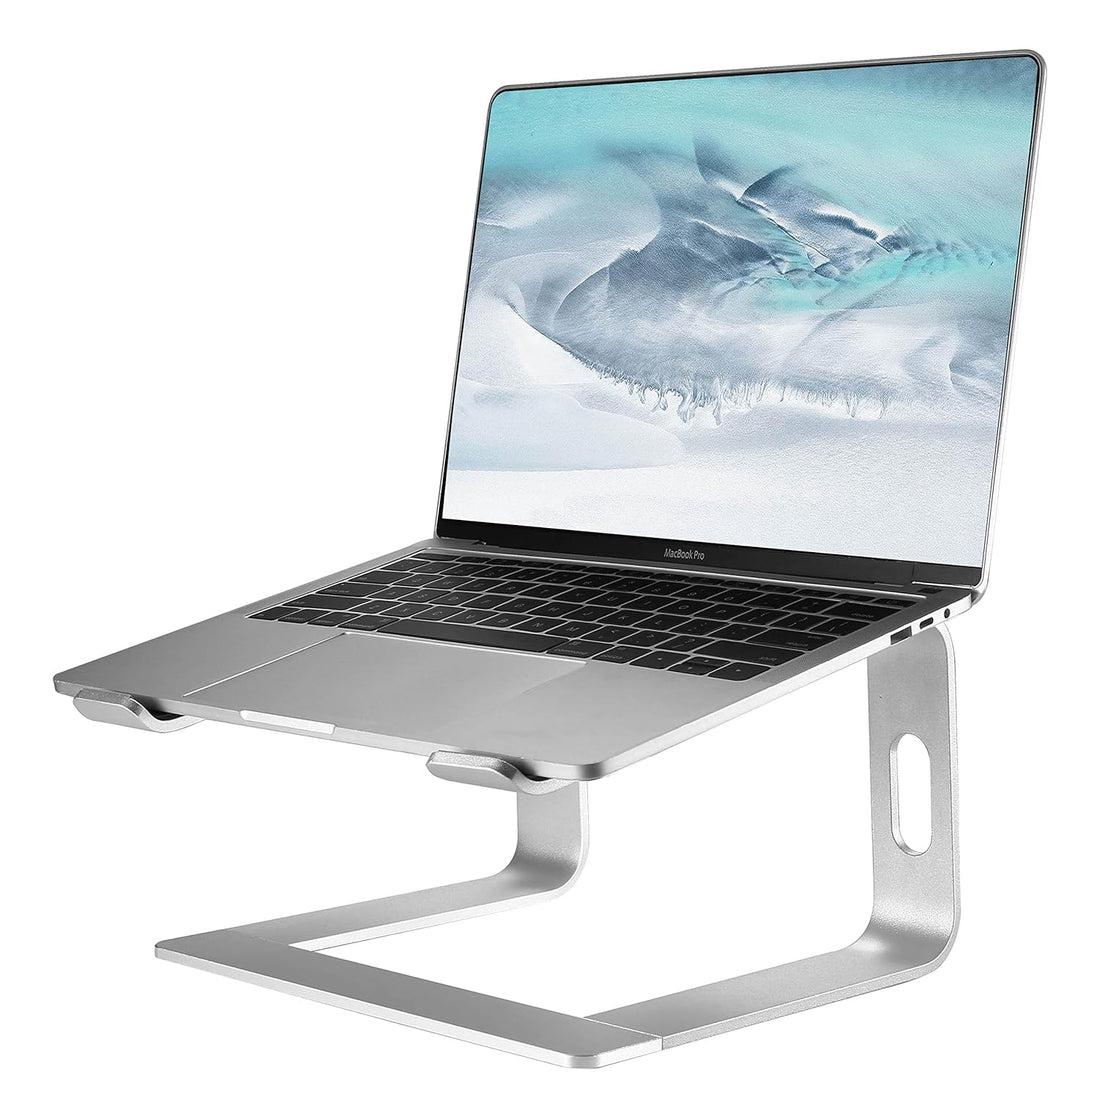 MOTEKK Laptop Stand for Desk - Sturdy Aluminum Computer Stand, Compact Laptop Riser for Desk, Detachable Laptop Holder - Portable Laptop Stand Compatible with 10 to 15.6 in Notebook Computer, Silver